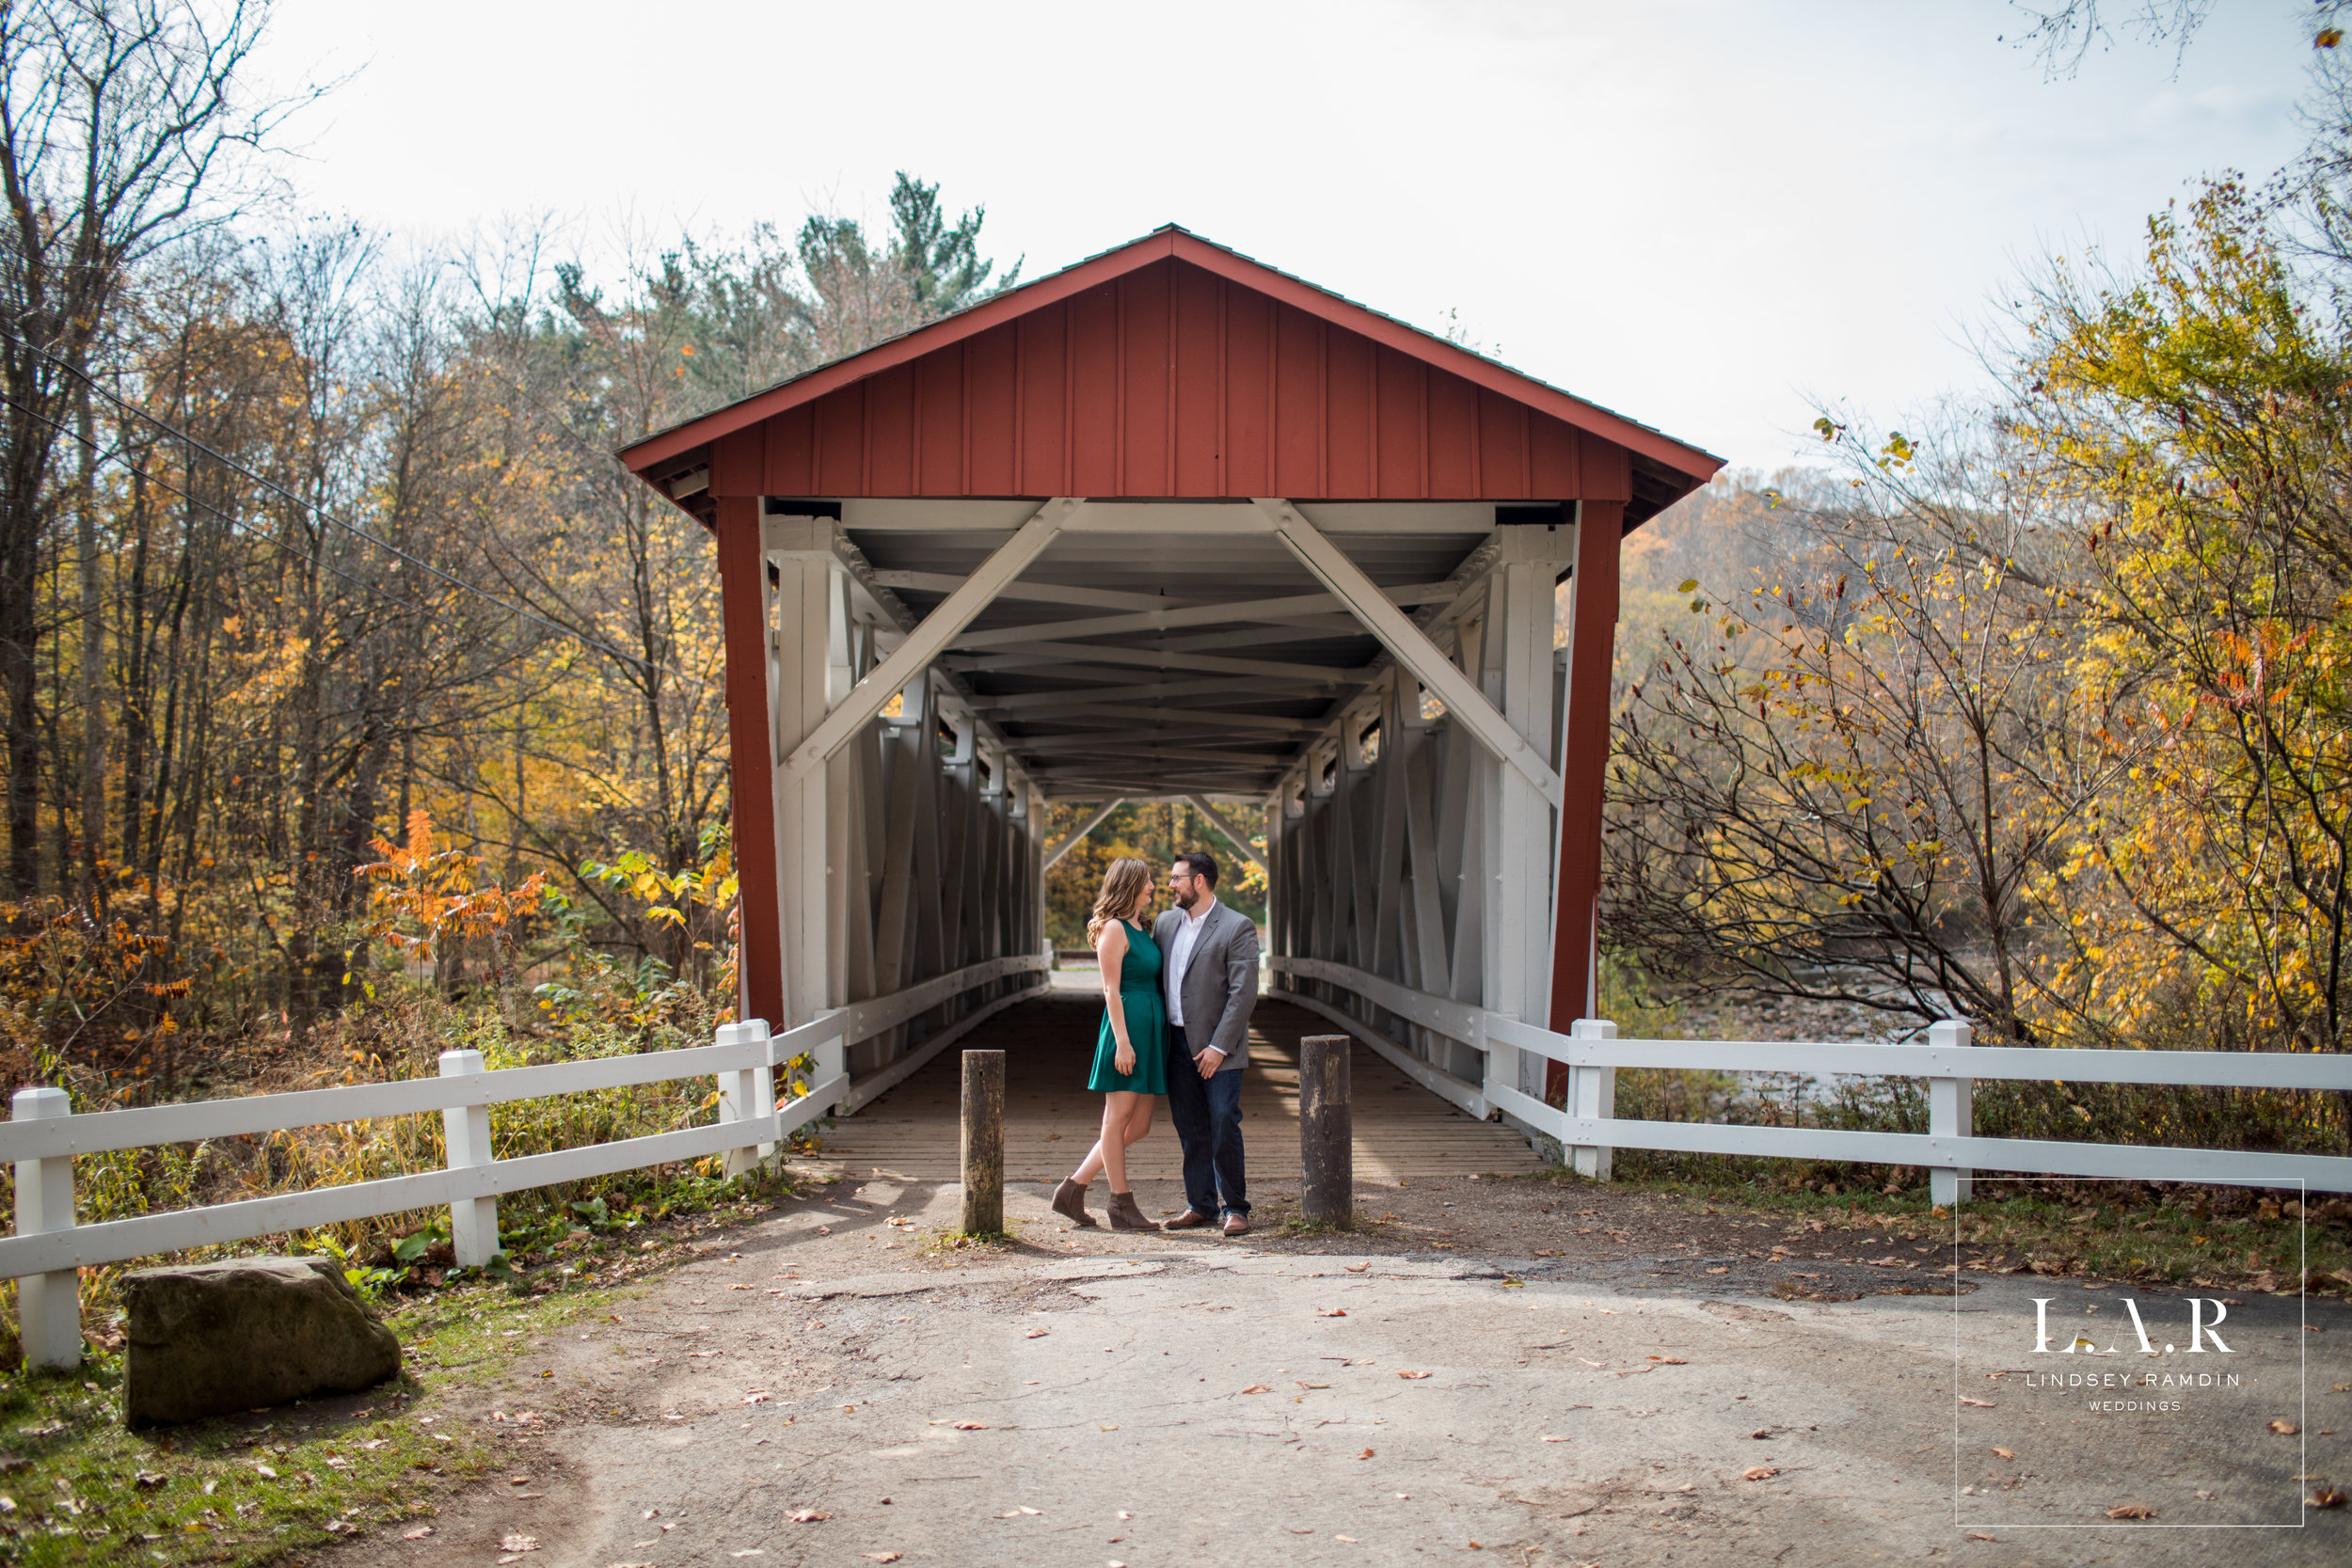 Cuyahoga Valley National Park Engagement Photo | L.A.R Weddings | Lindsey Ramdin